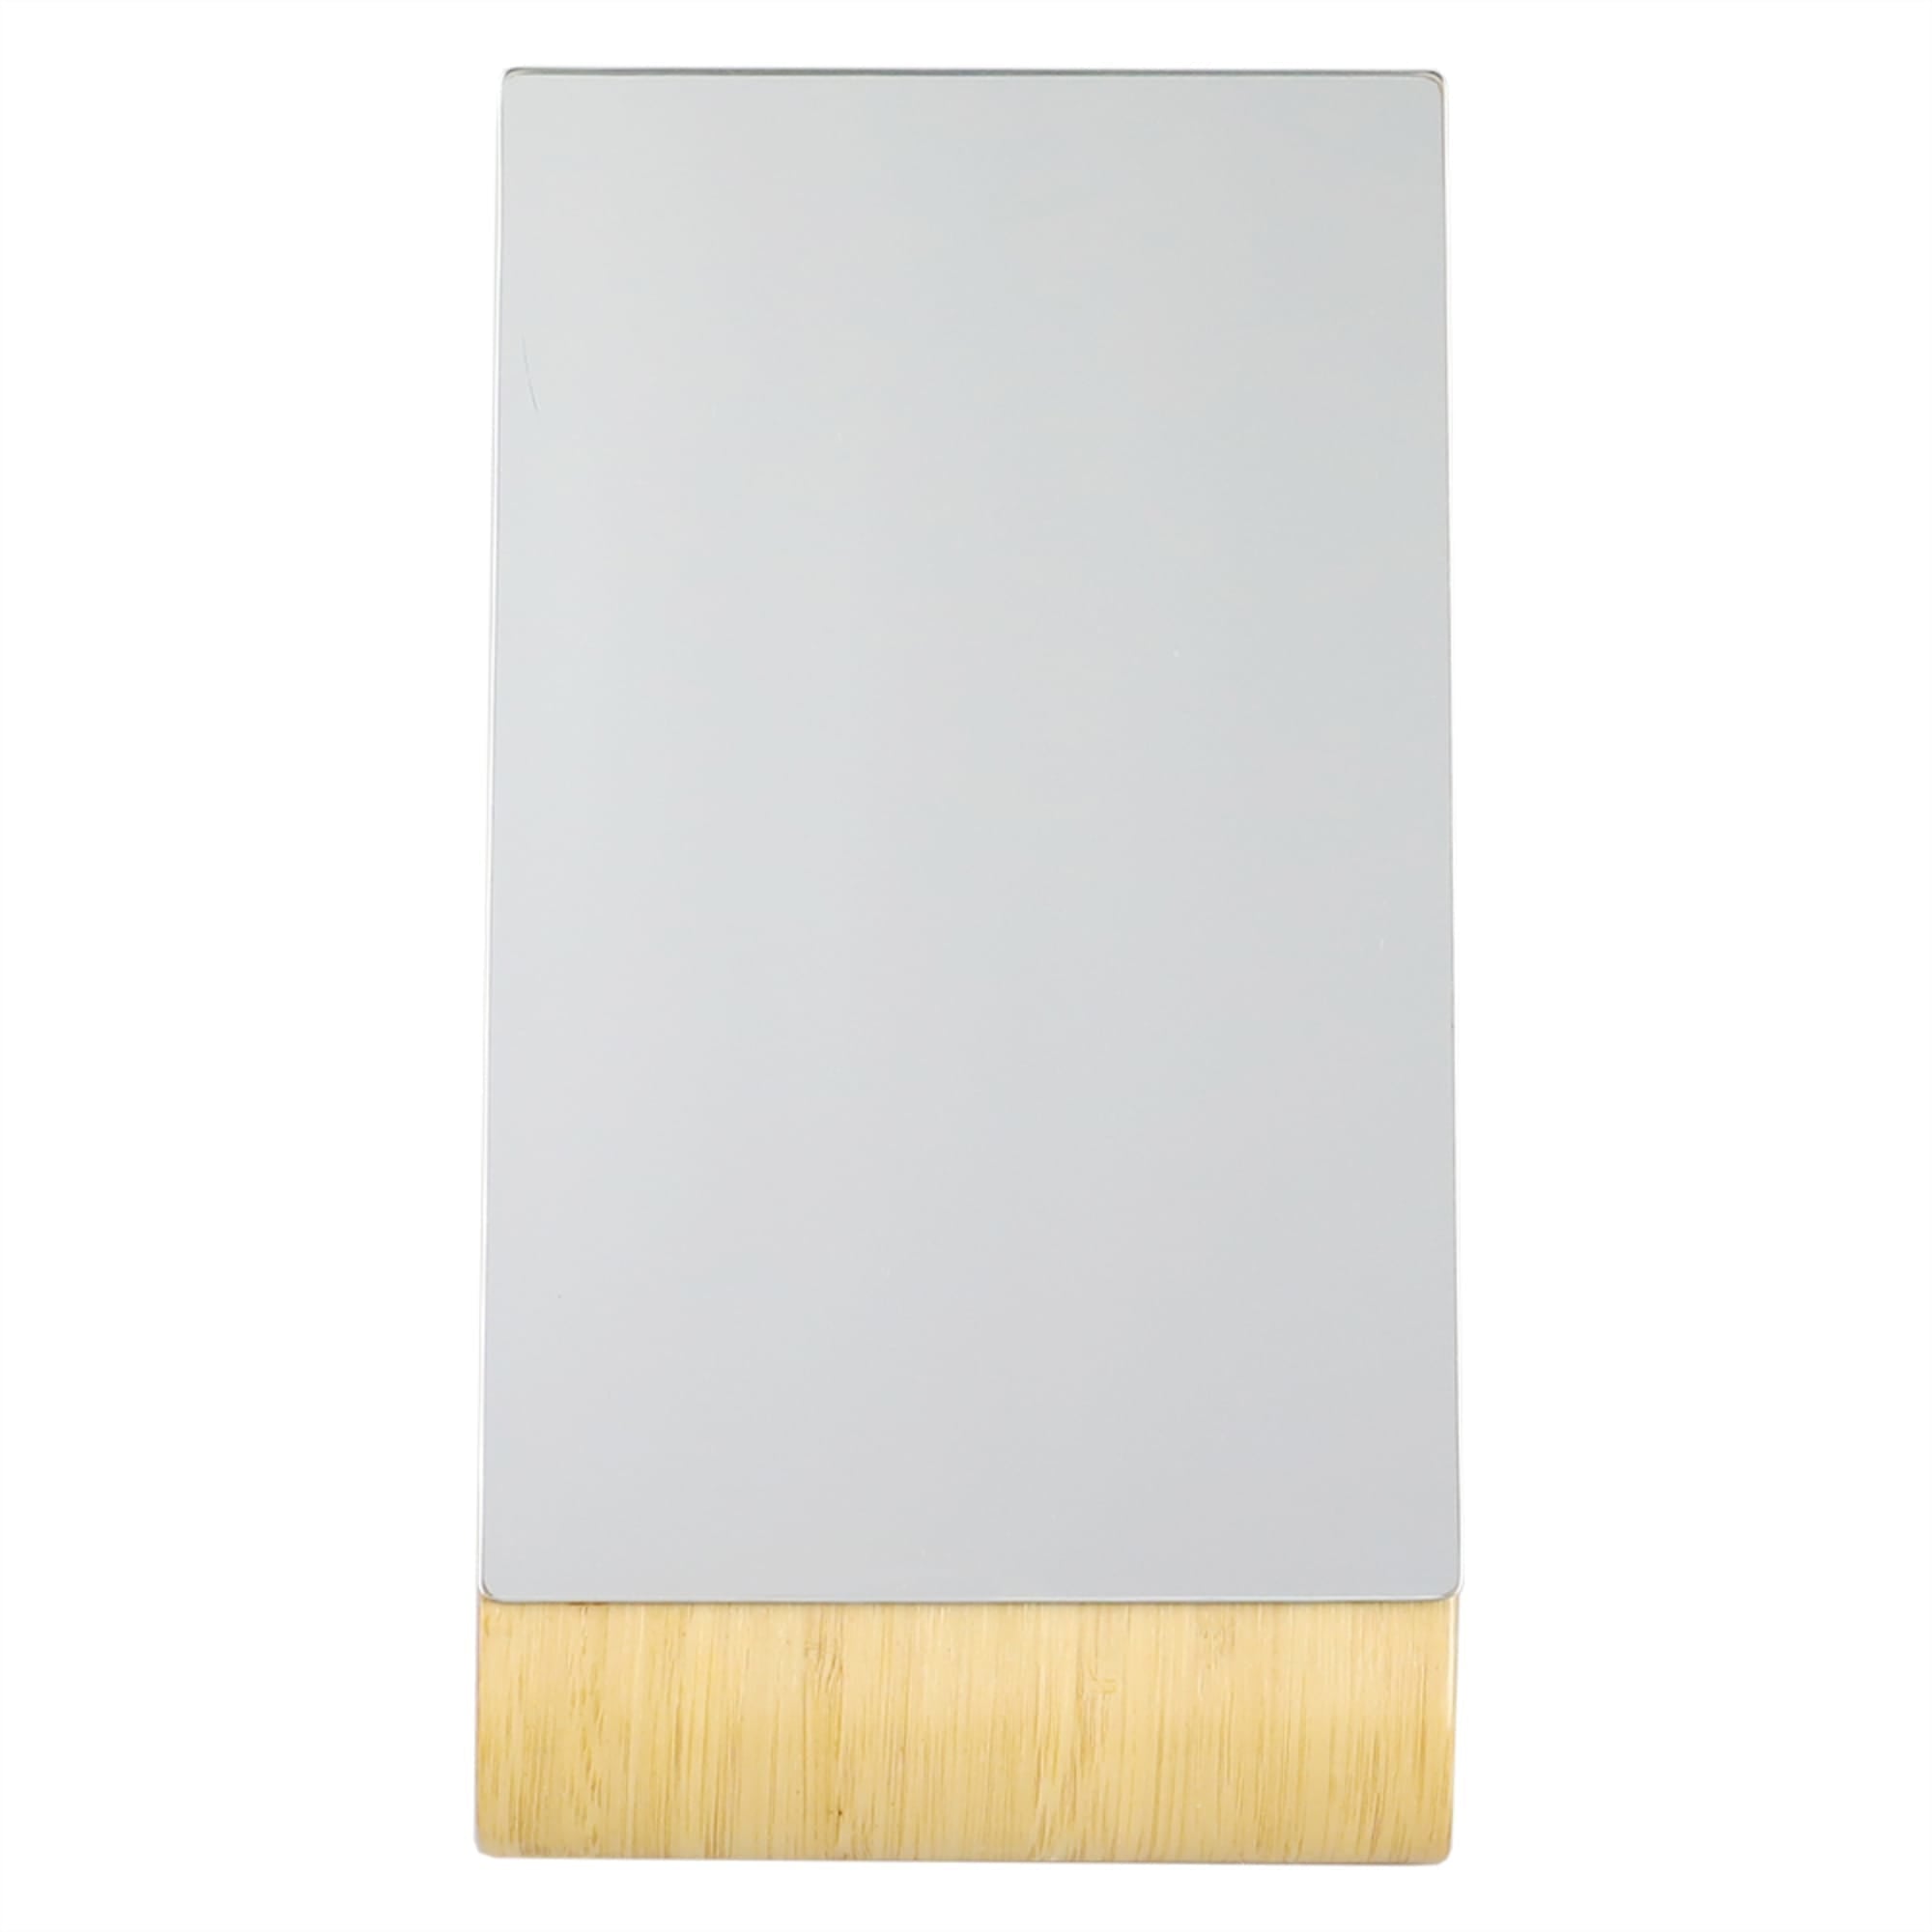 Home Basics Angled Single Sided  Bamboo Desktop Mirror, Natural $10.00 EACH, CASE PACK OF 12